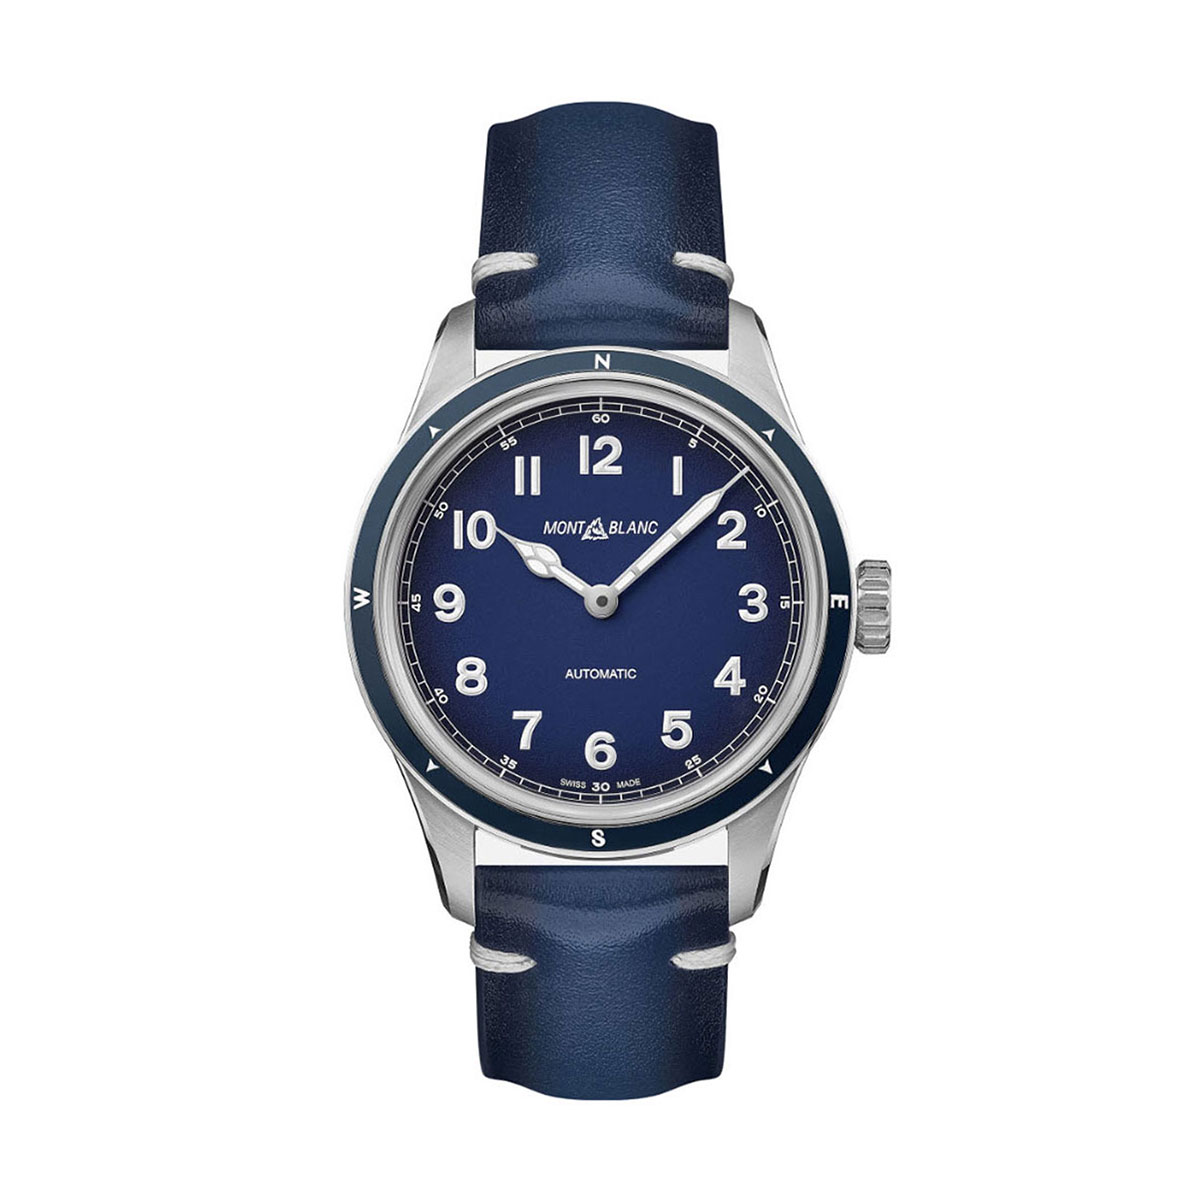 Montblanc 1858 Automatic 40mm Watch, Blue Dial | 126758 | Borsheims